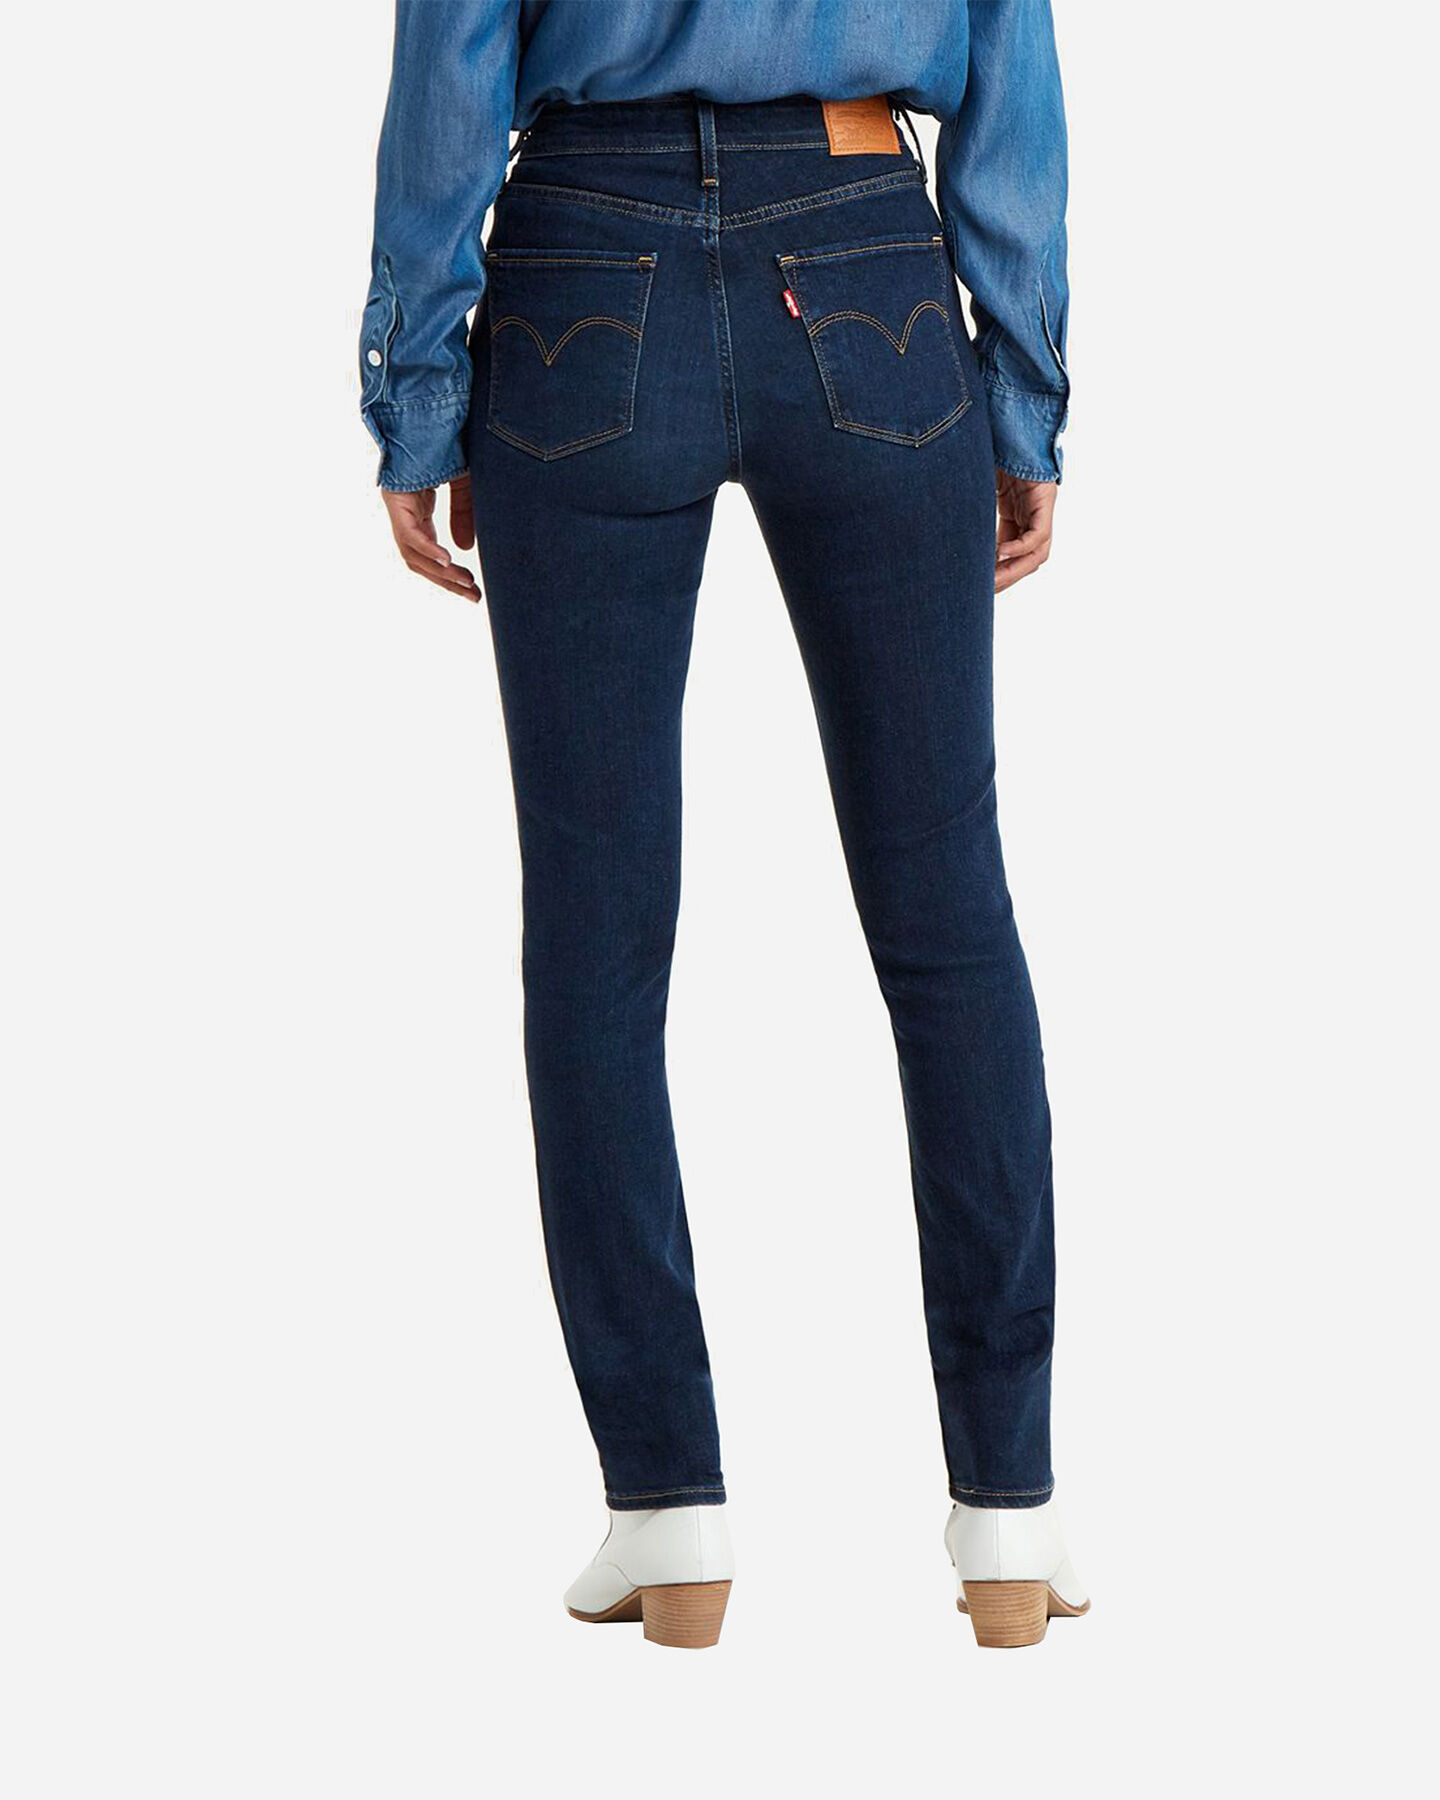  Jeans LEVI'S 721 HIGH RISE SKINNY  W S4097258|0362|26 scatto 2